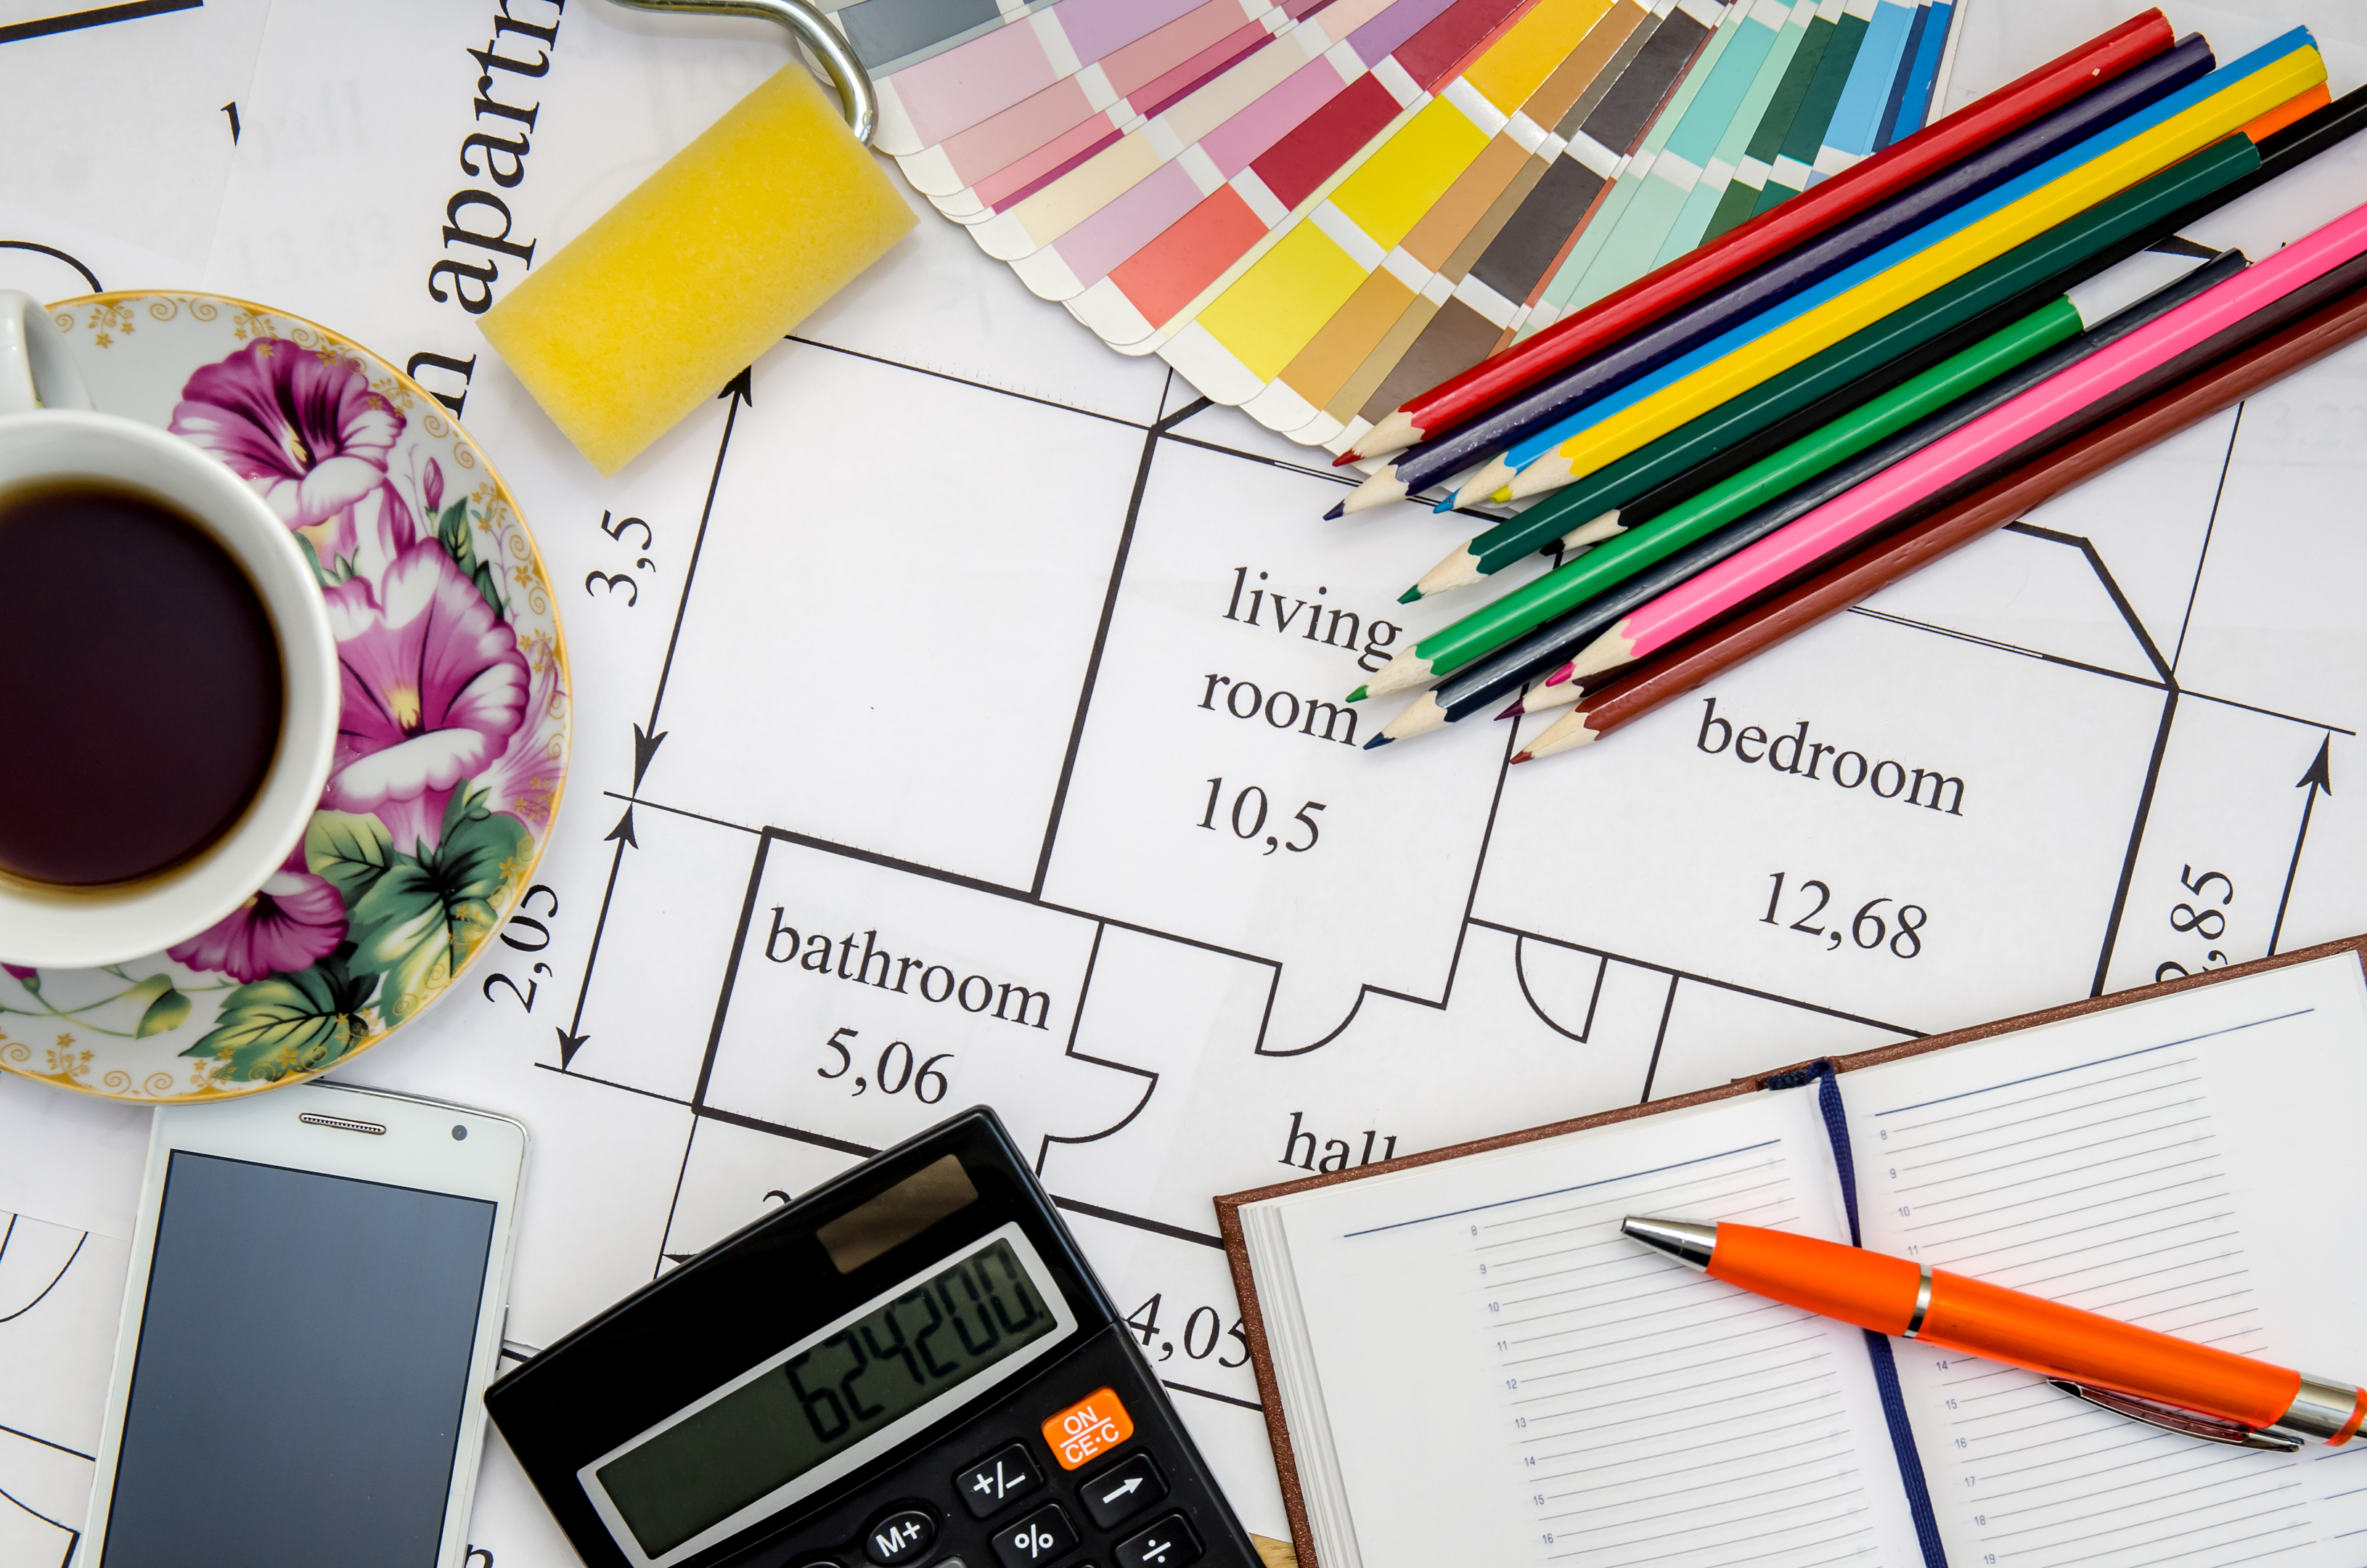 How to calculate paint area refers to the total square footage of a space that will be painted